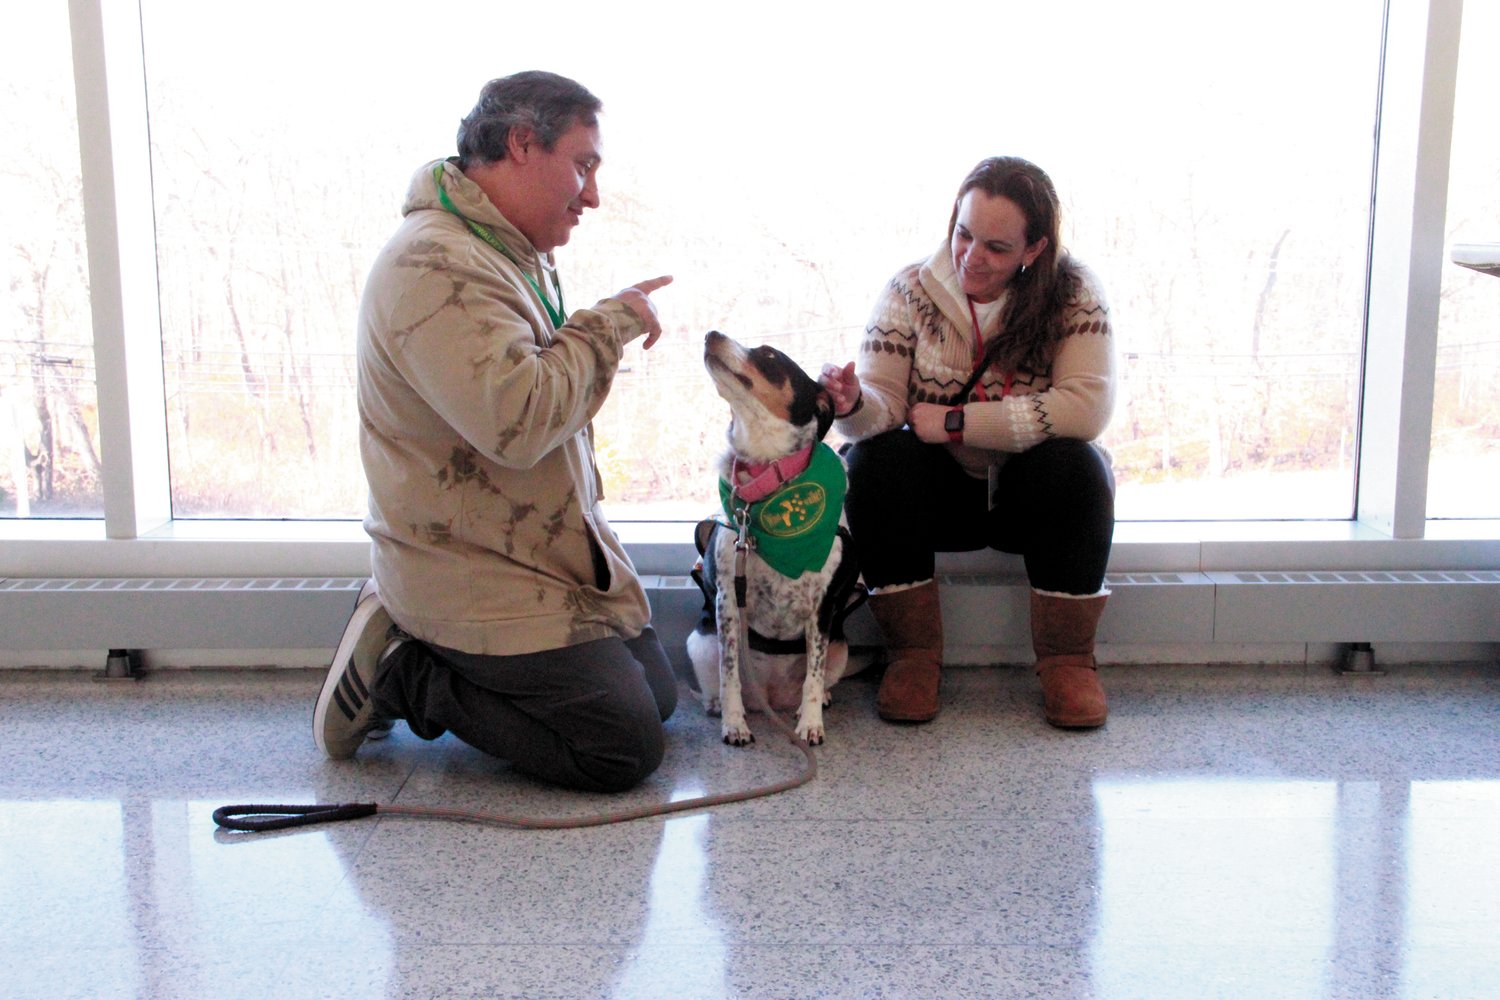 COURT MANNERS: Mia the cattle dog obeys trainer Carlos Moriella’s commands with July DeSousa. Carlos Moriella’s company Soul Therapy Dogs helped comfort children and families during the adoption process.